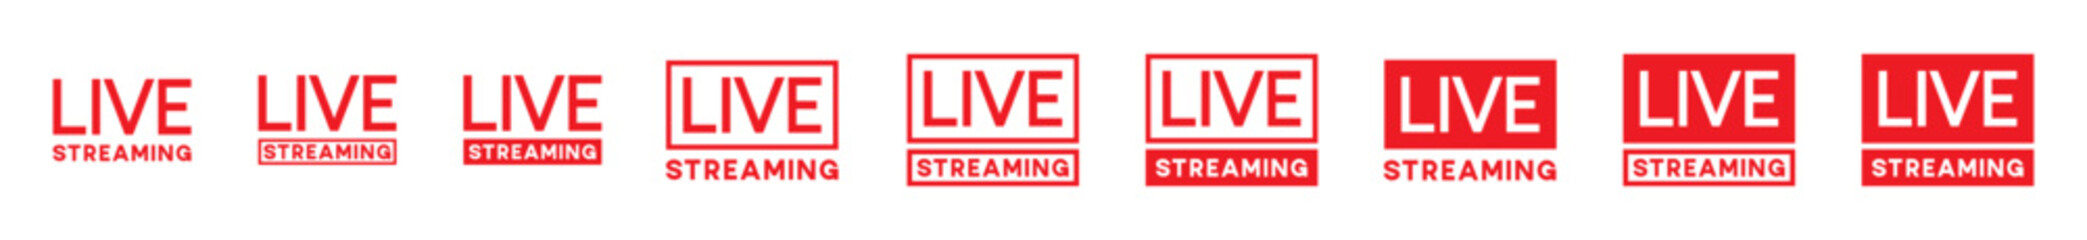 Live streaming icons set. Video live broadcasting for blog, television, movies, shows, news and various video content. Live streaming red buttons stock vector, symbol illustration